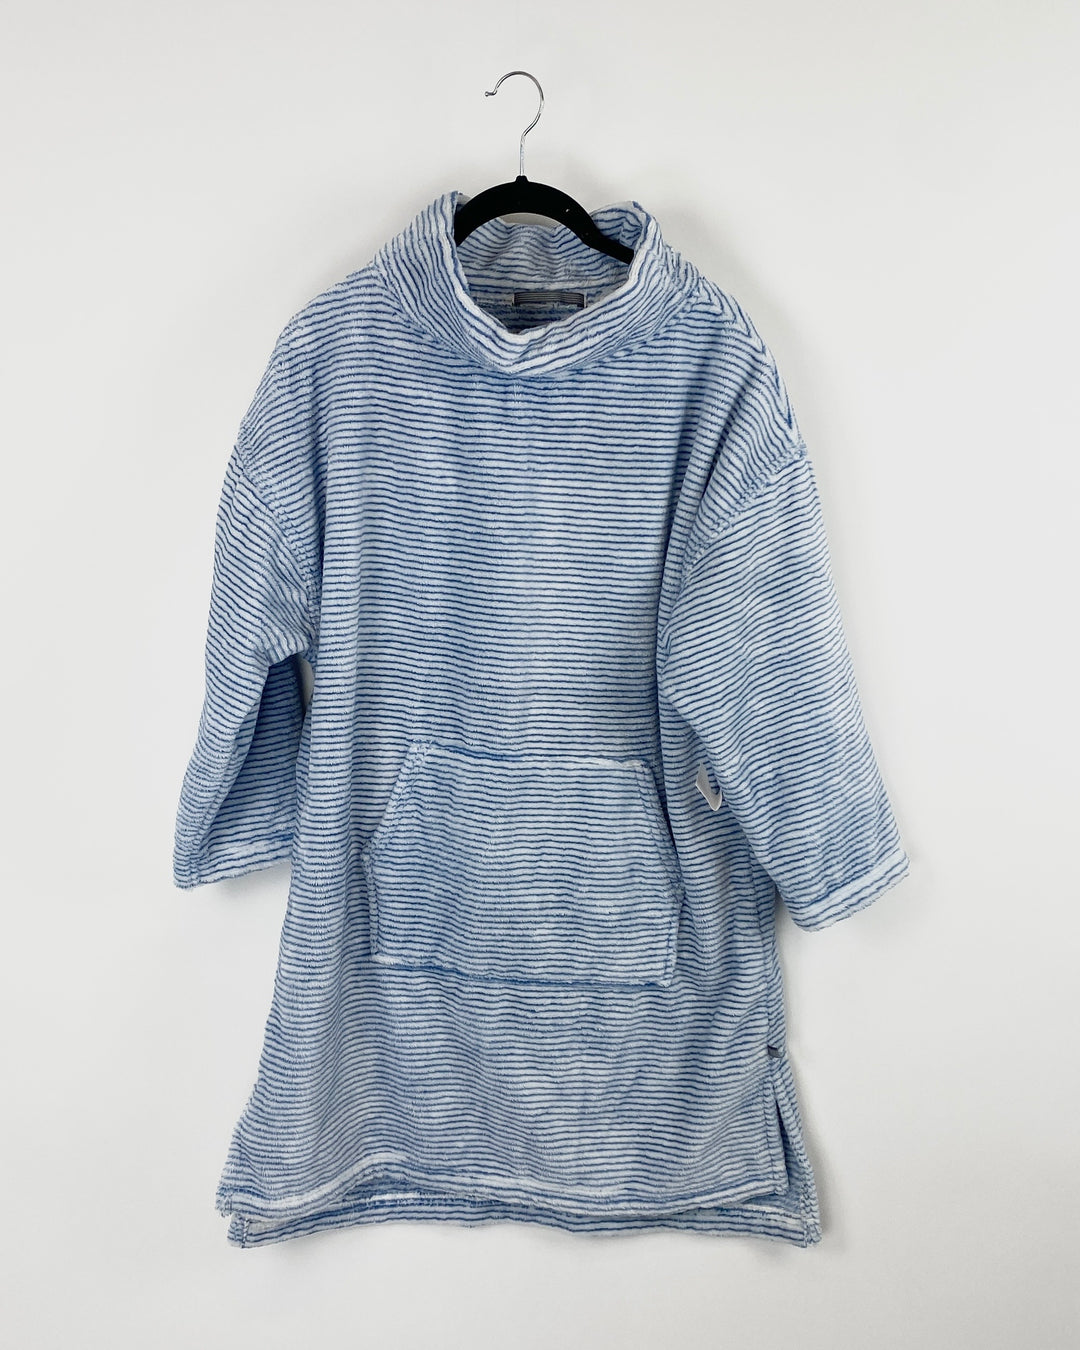 Blue and White Striped Fuzzy Long Sweatshirt - Small